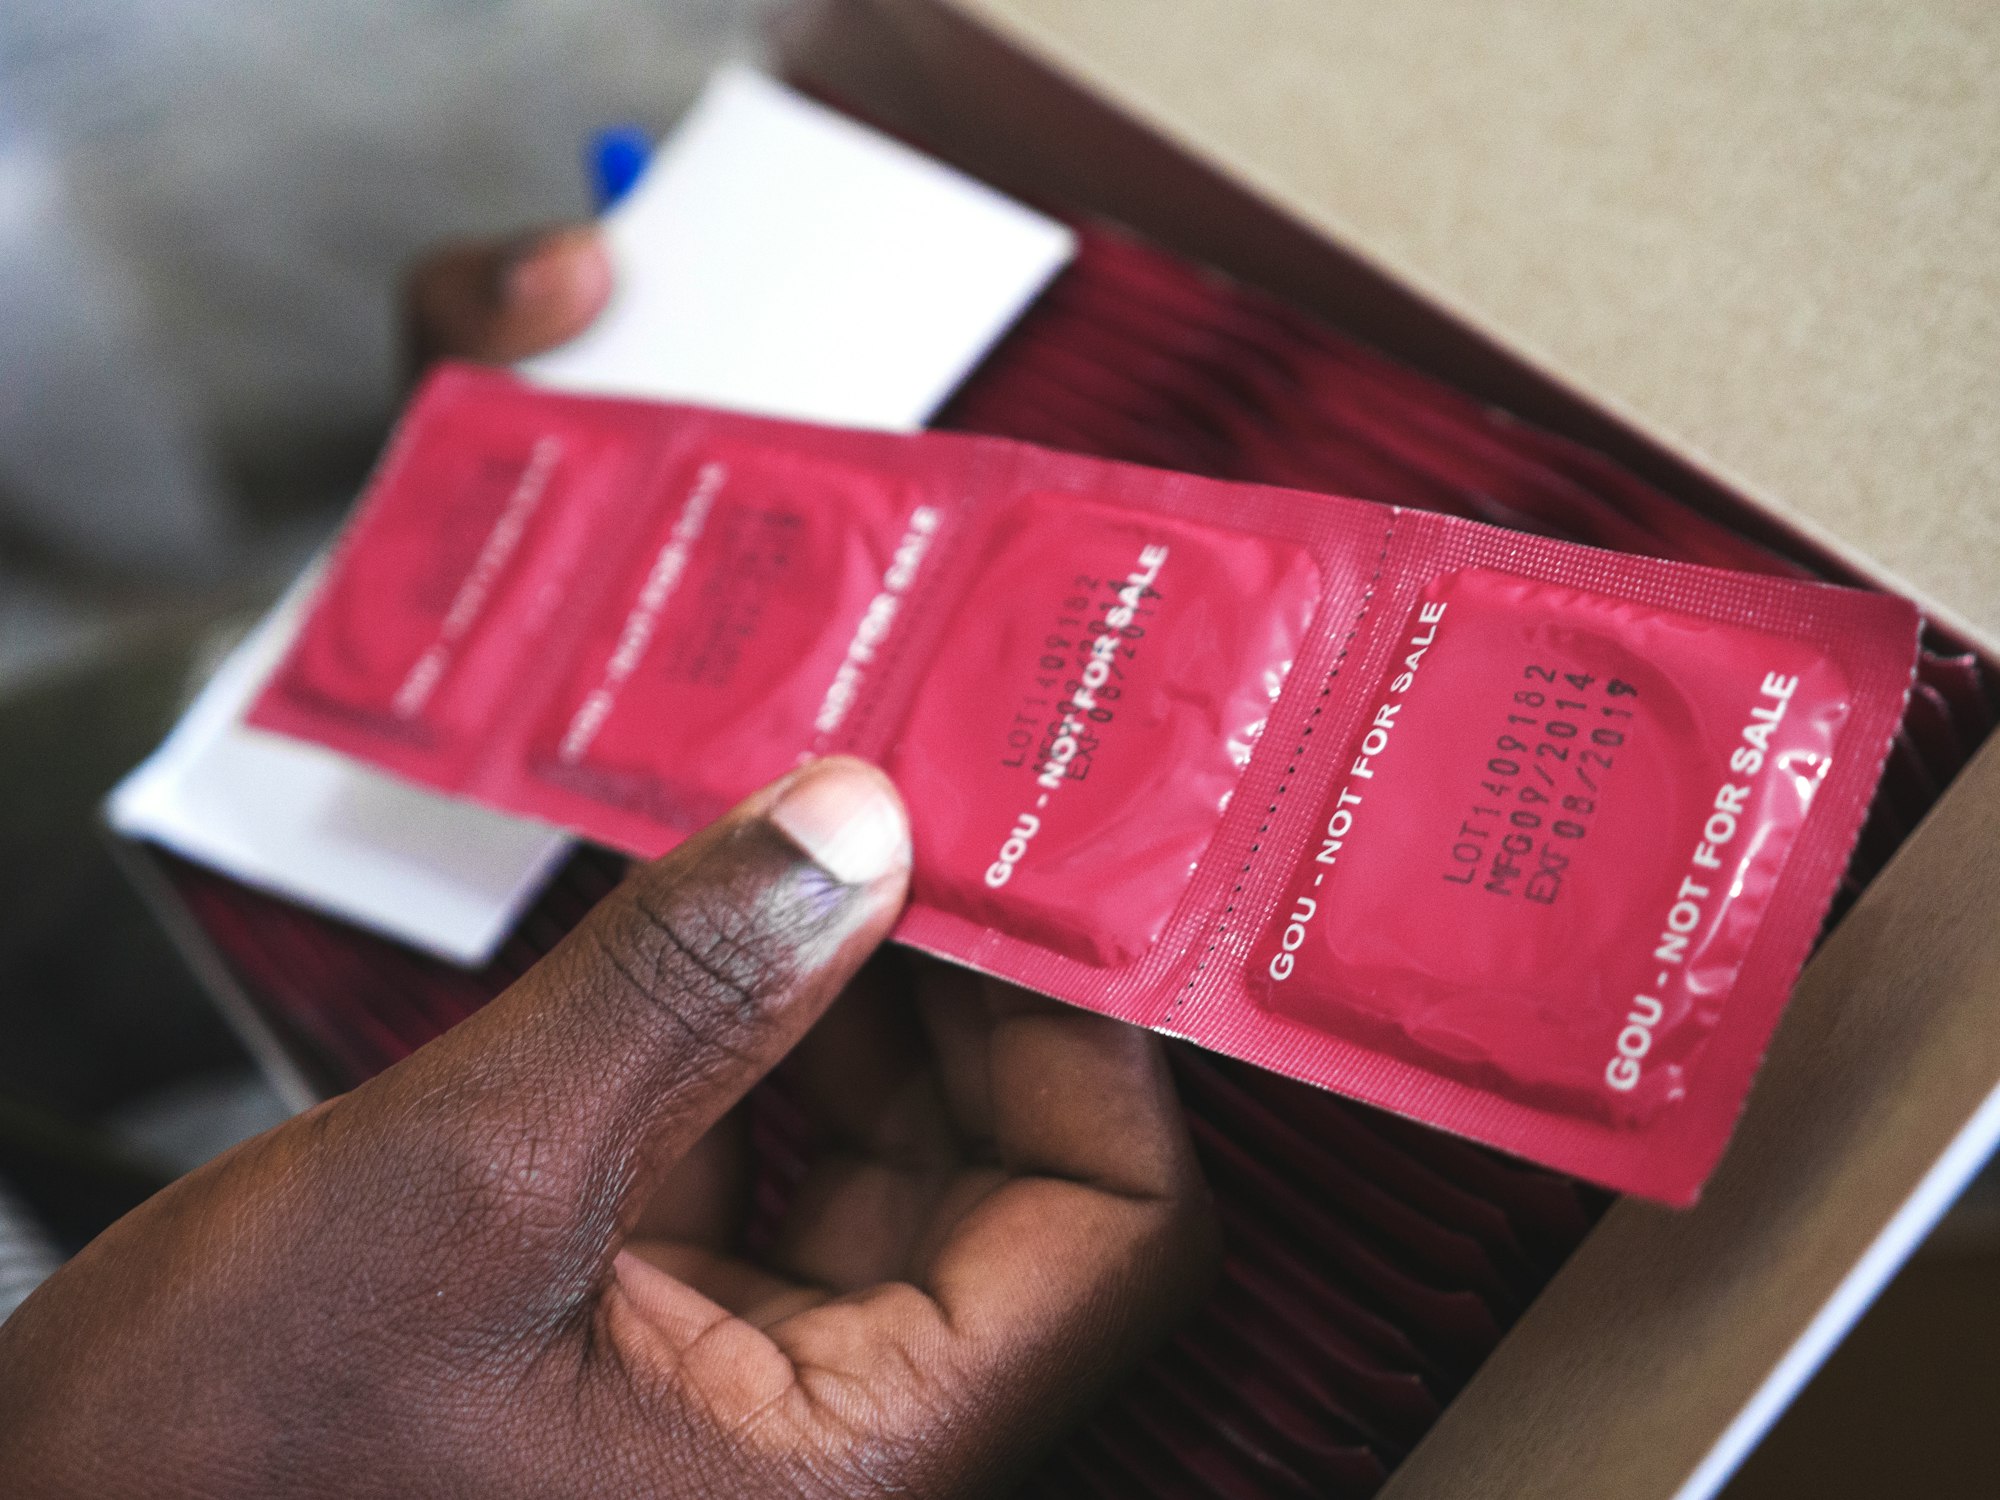 Condomize and Stay Alive: Access to Contraception in West and Sub-Saharan Africa